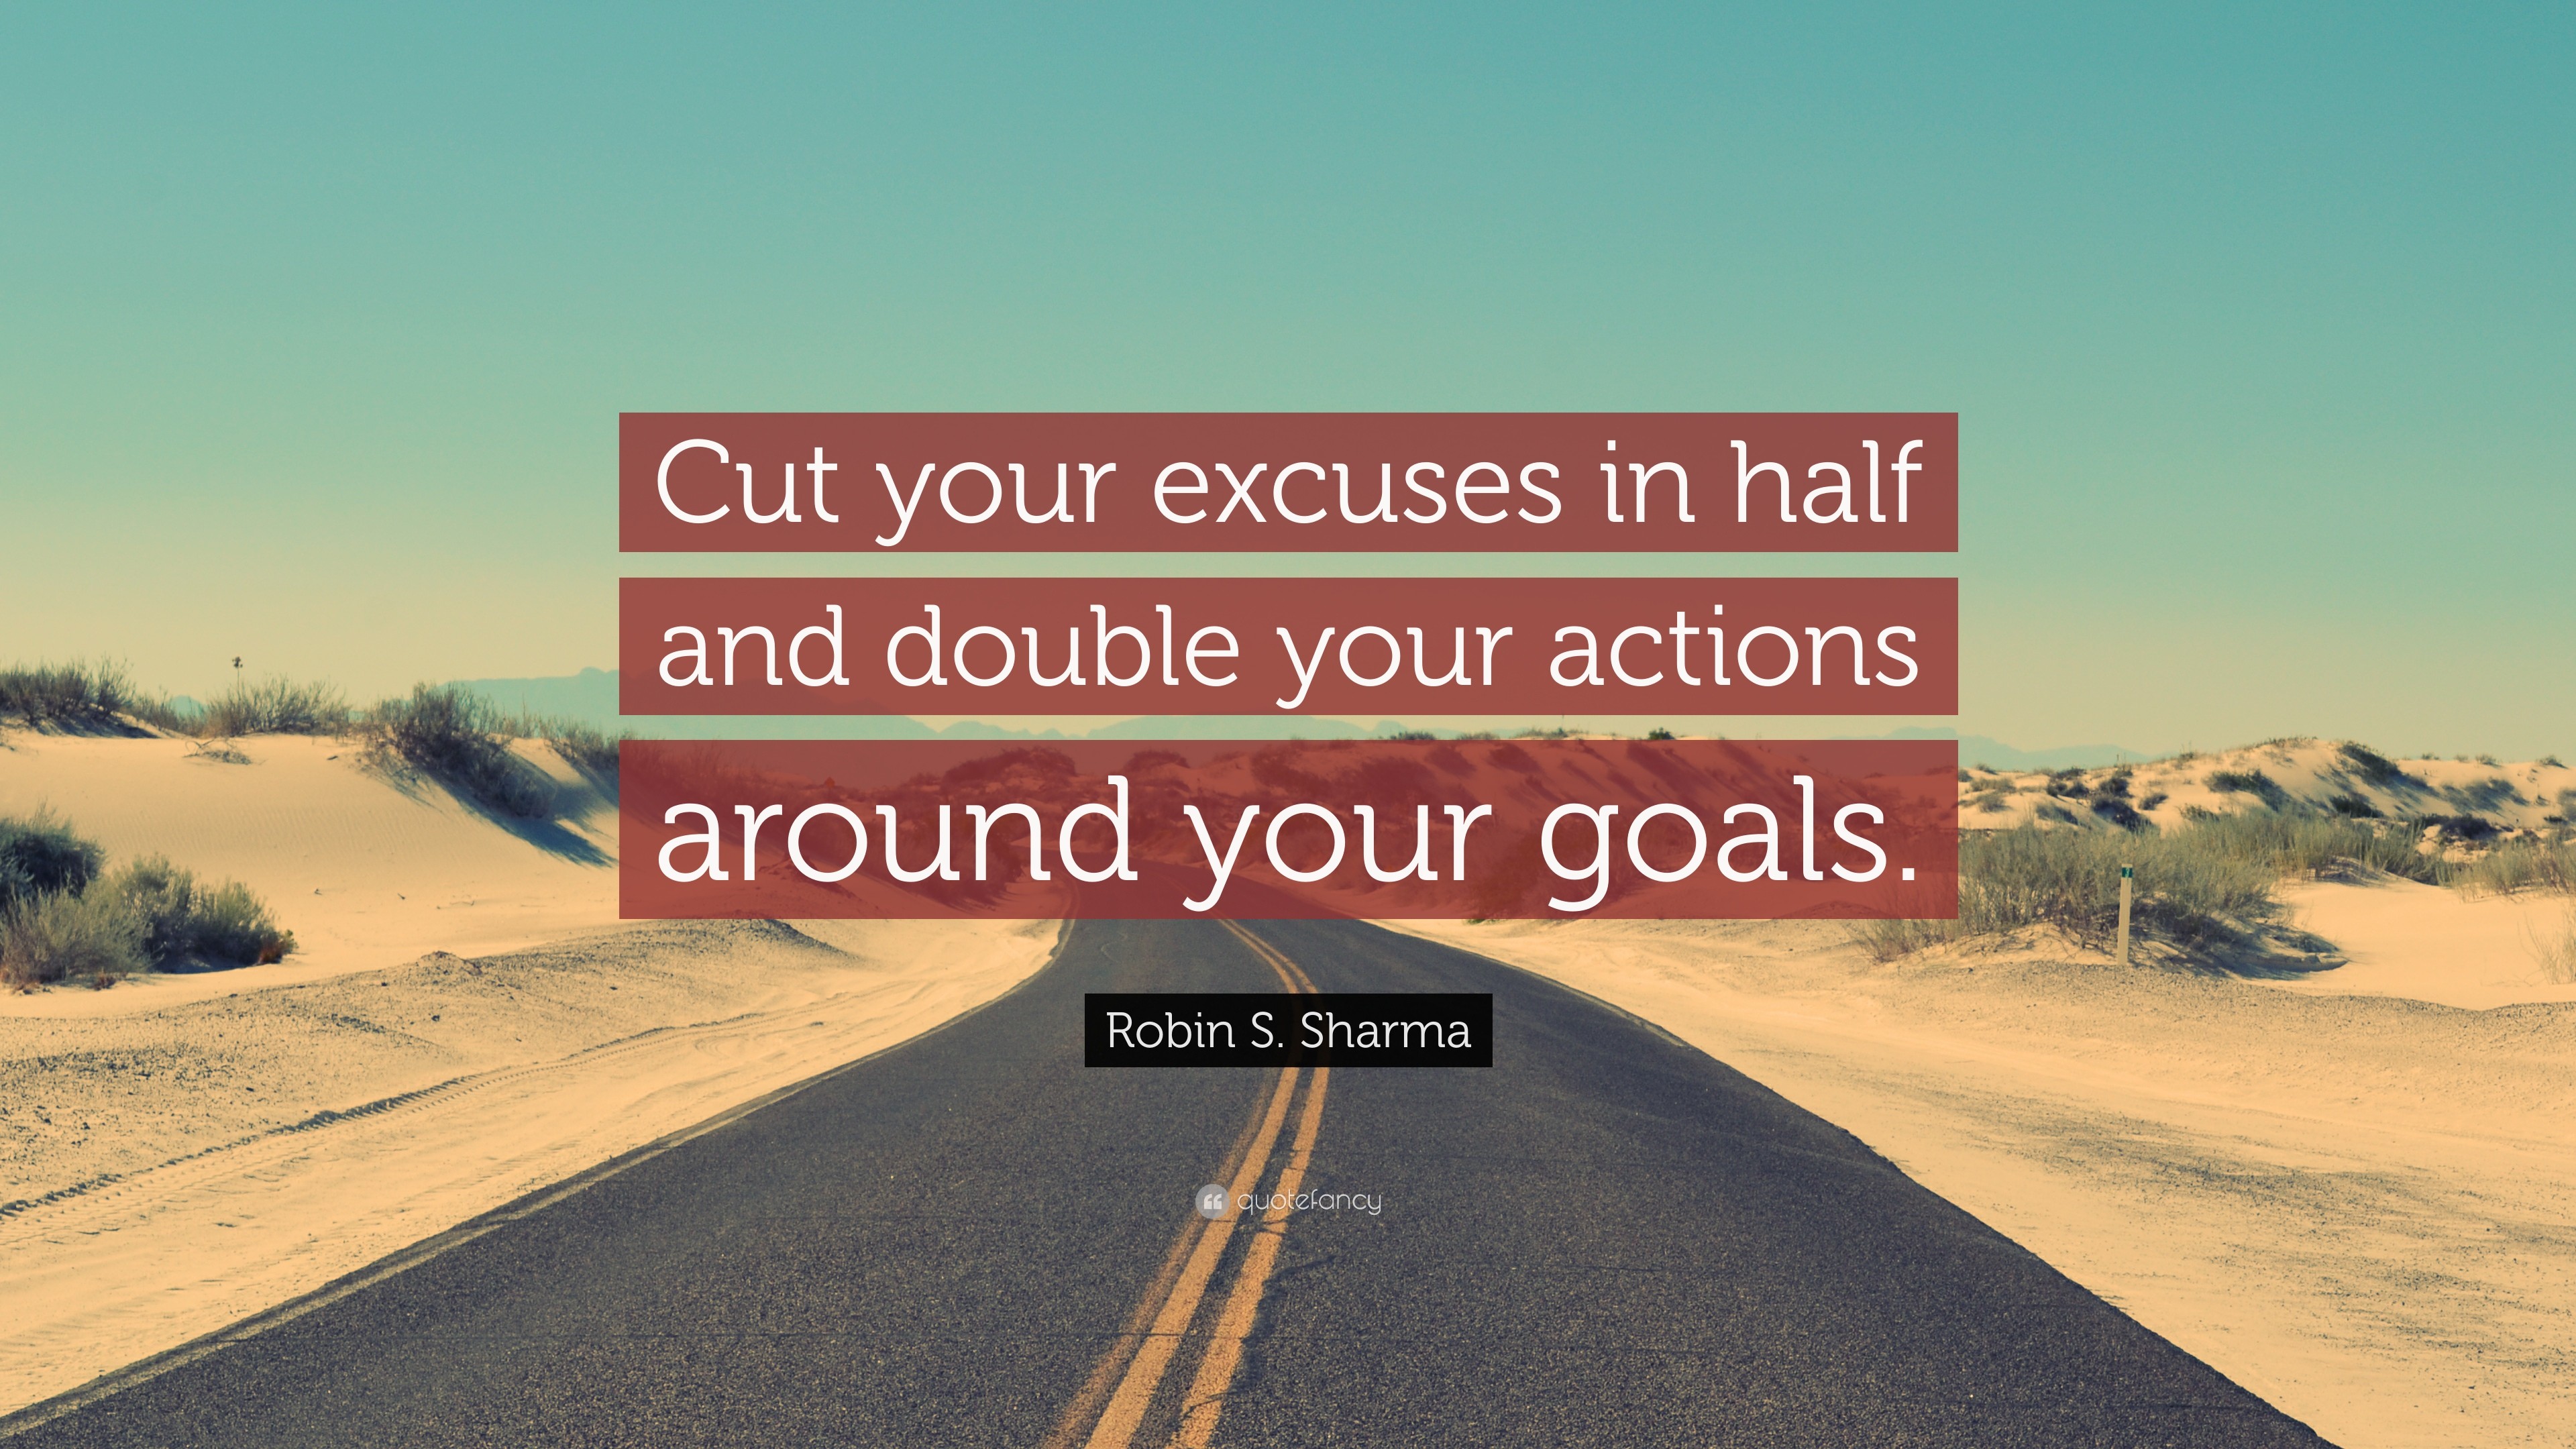 3840x2160 Goal Quotes: “Cut your excuses in half and double your actions around your  goals